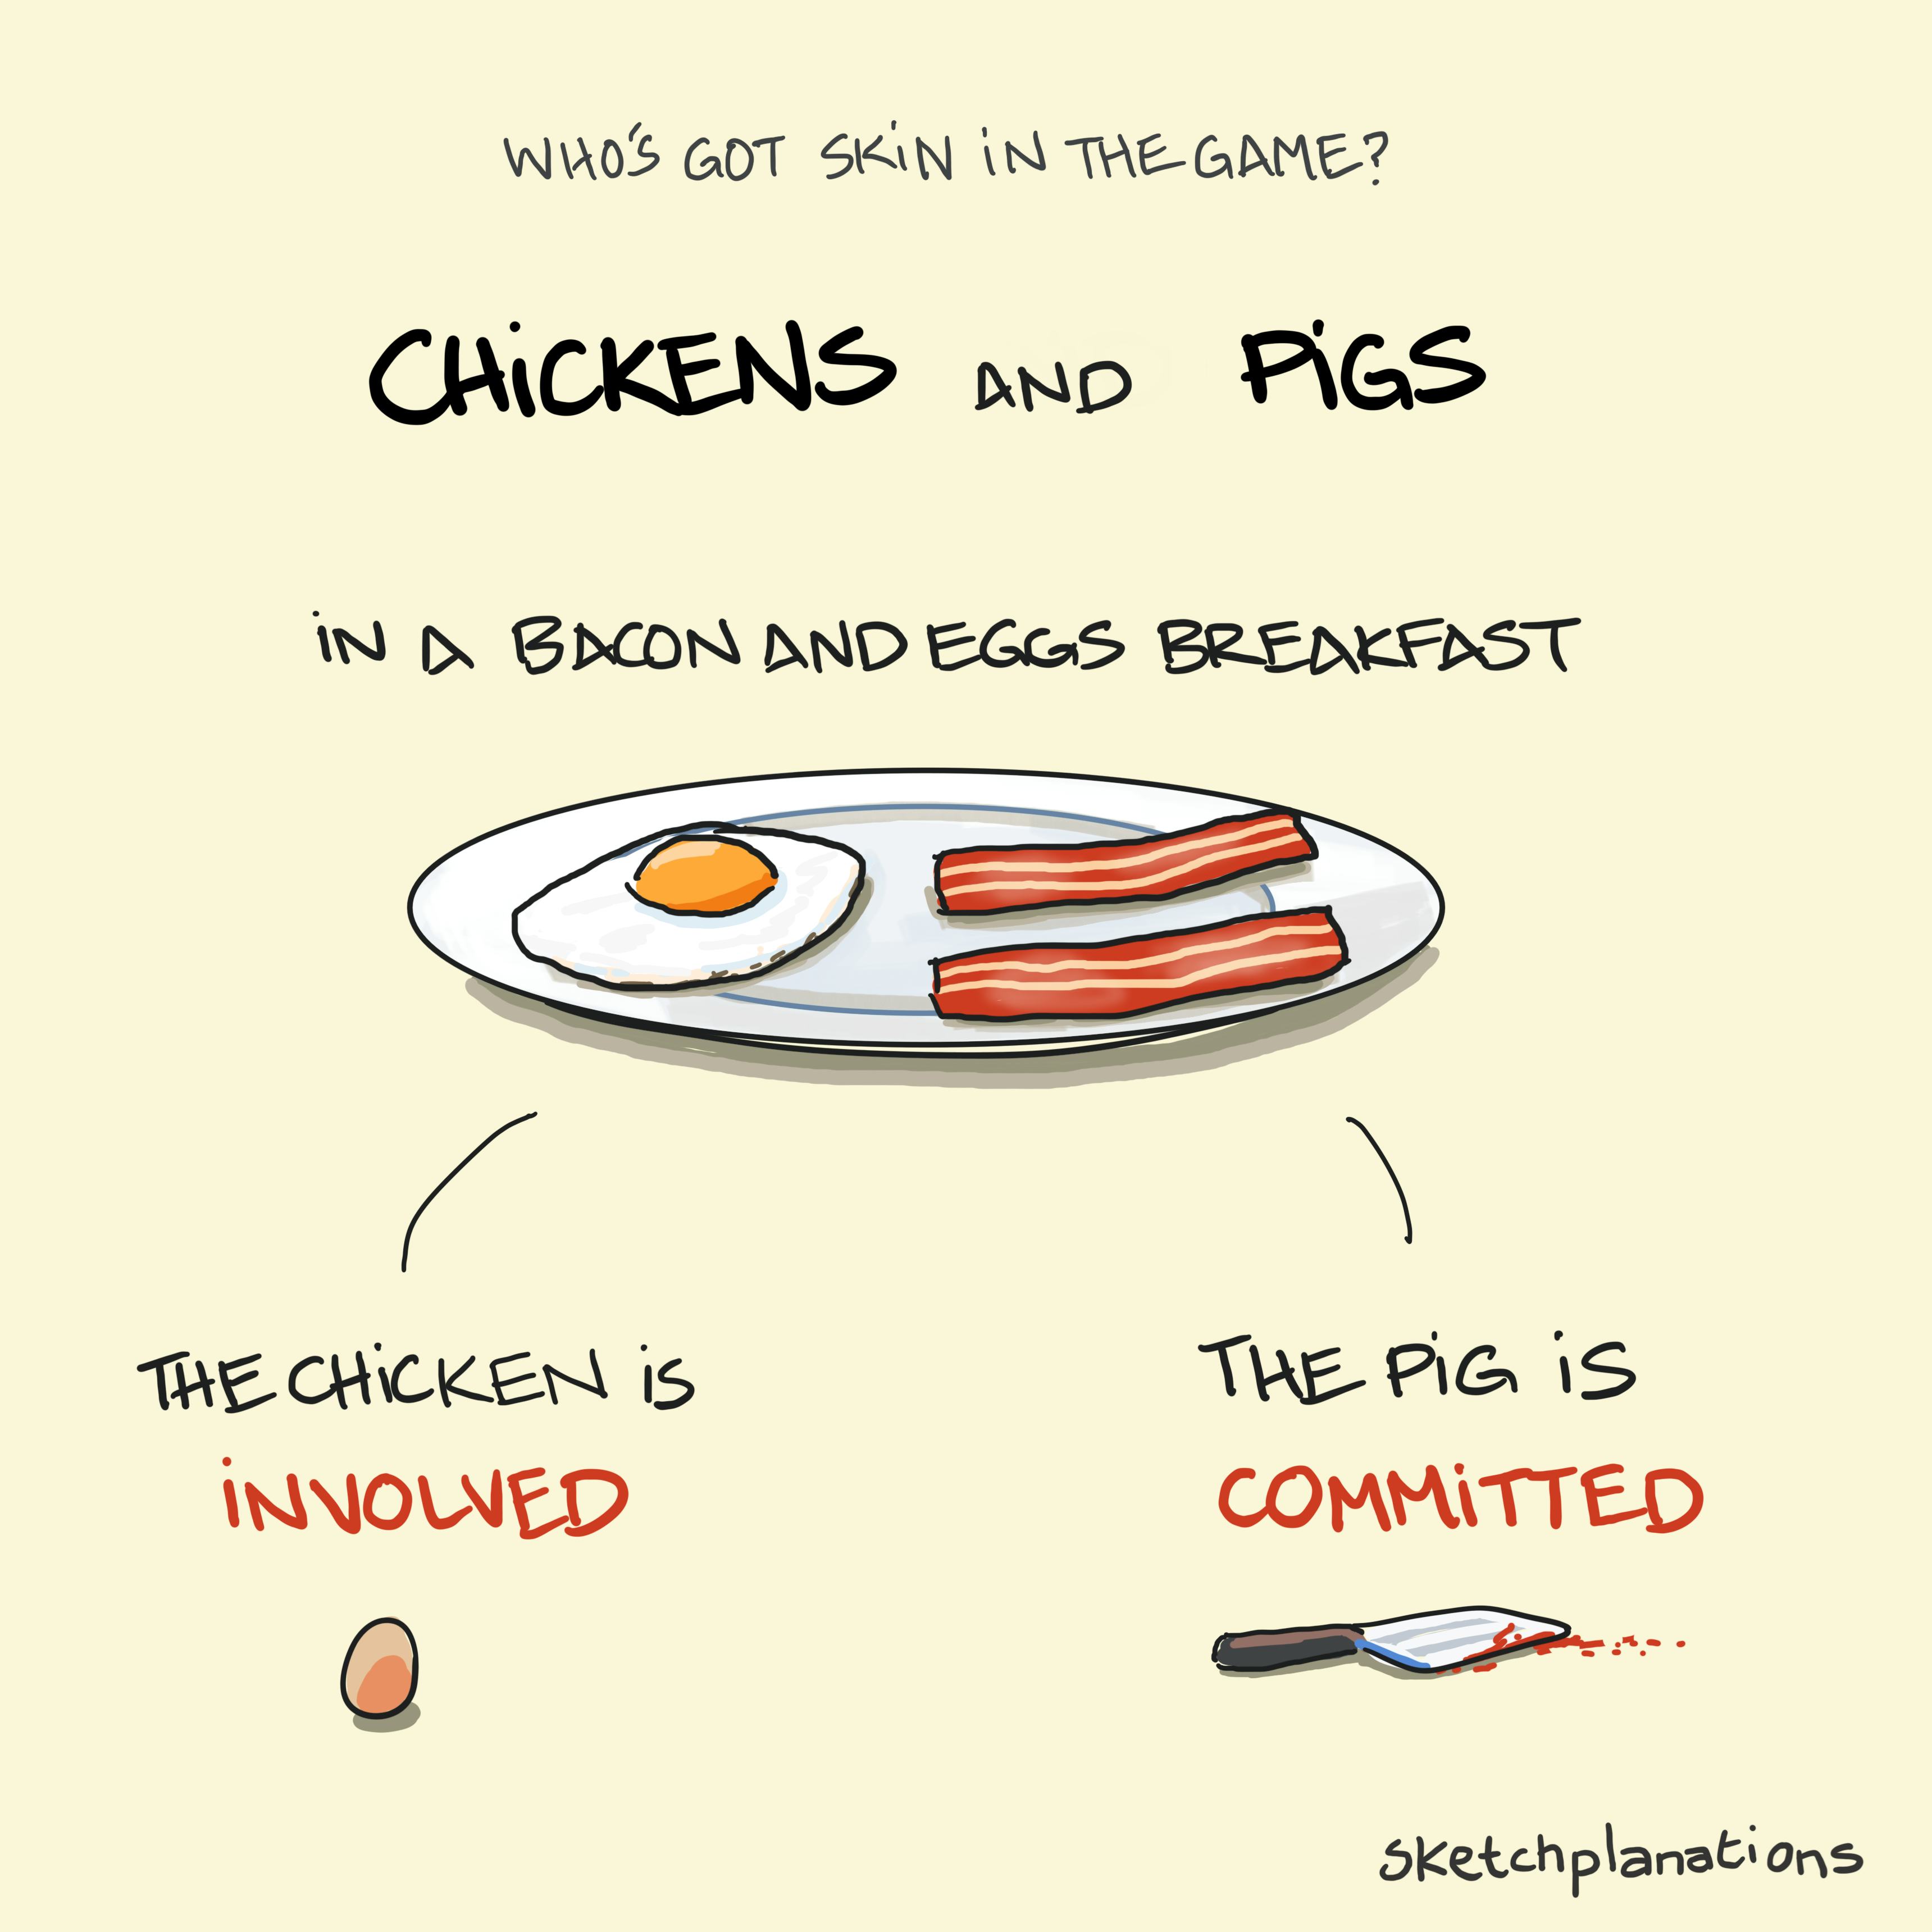 Chickens and pigs illustration: also known as the bacon and eggs principle, shows a bacon and fried egg breakfast with an egg for the chicken's involvement and a cleaver for the pig's